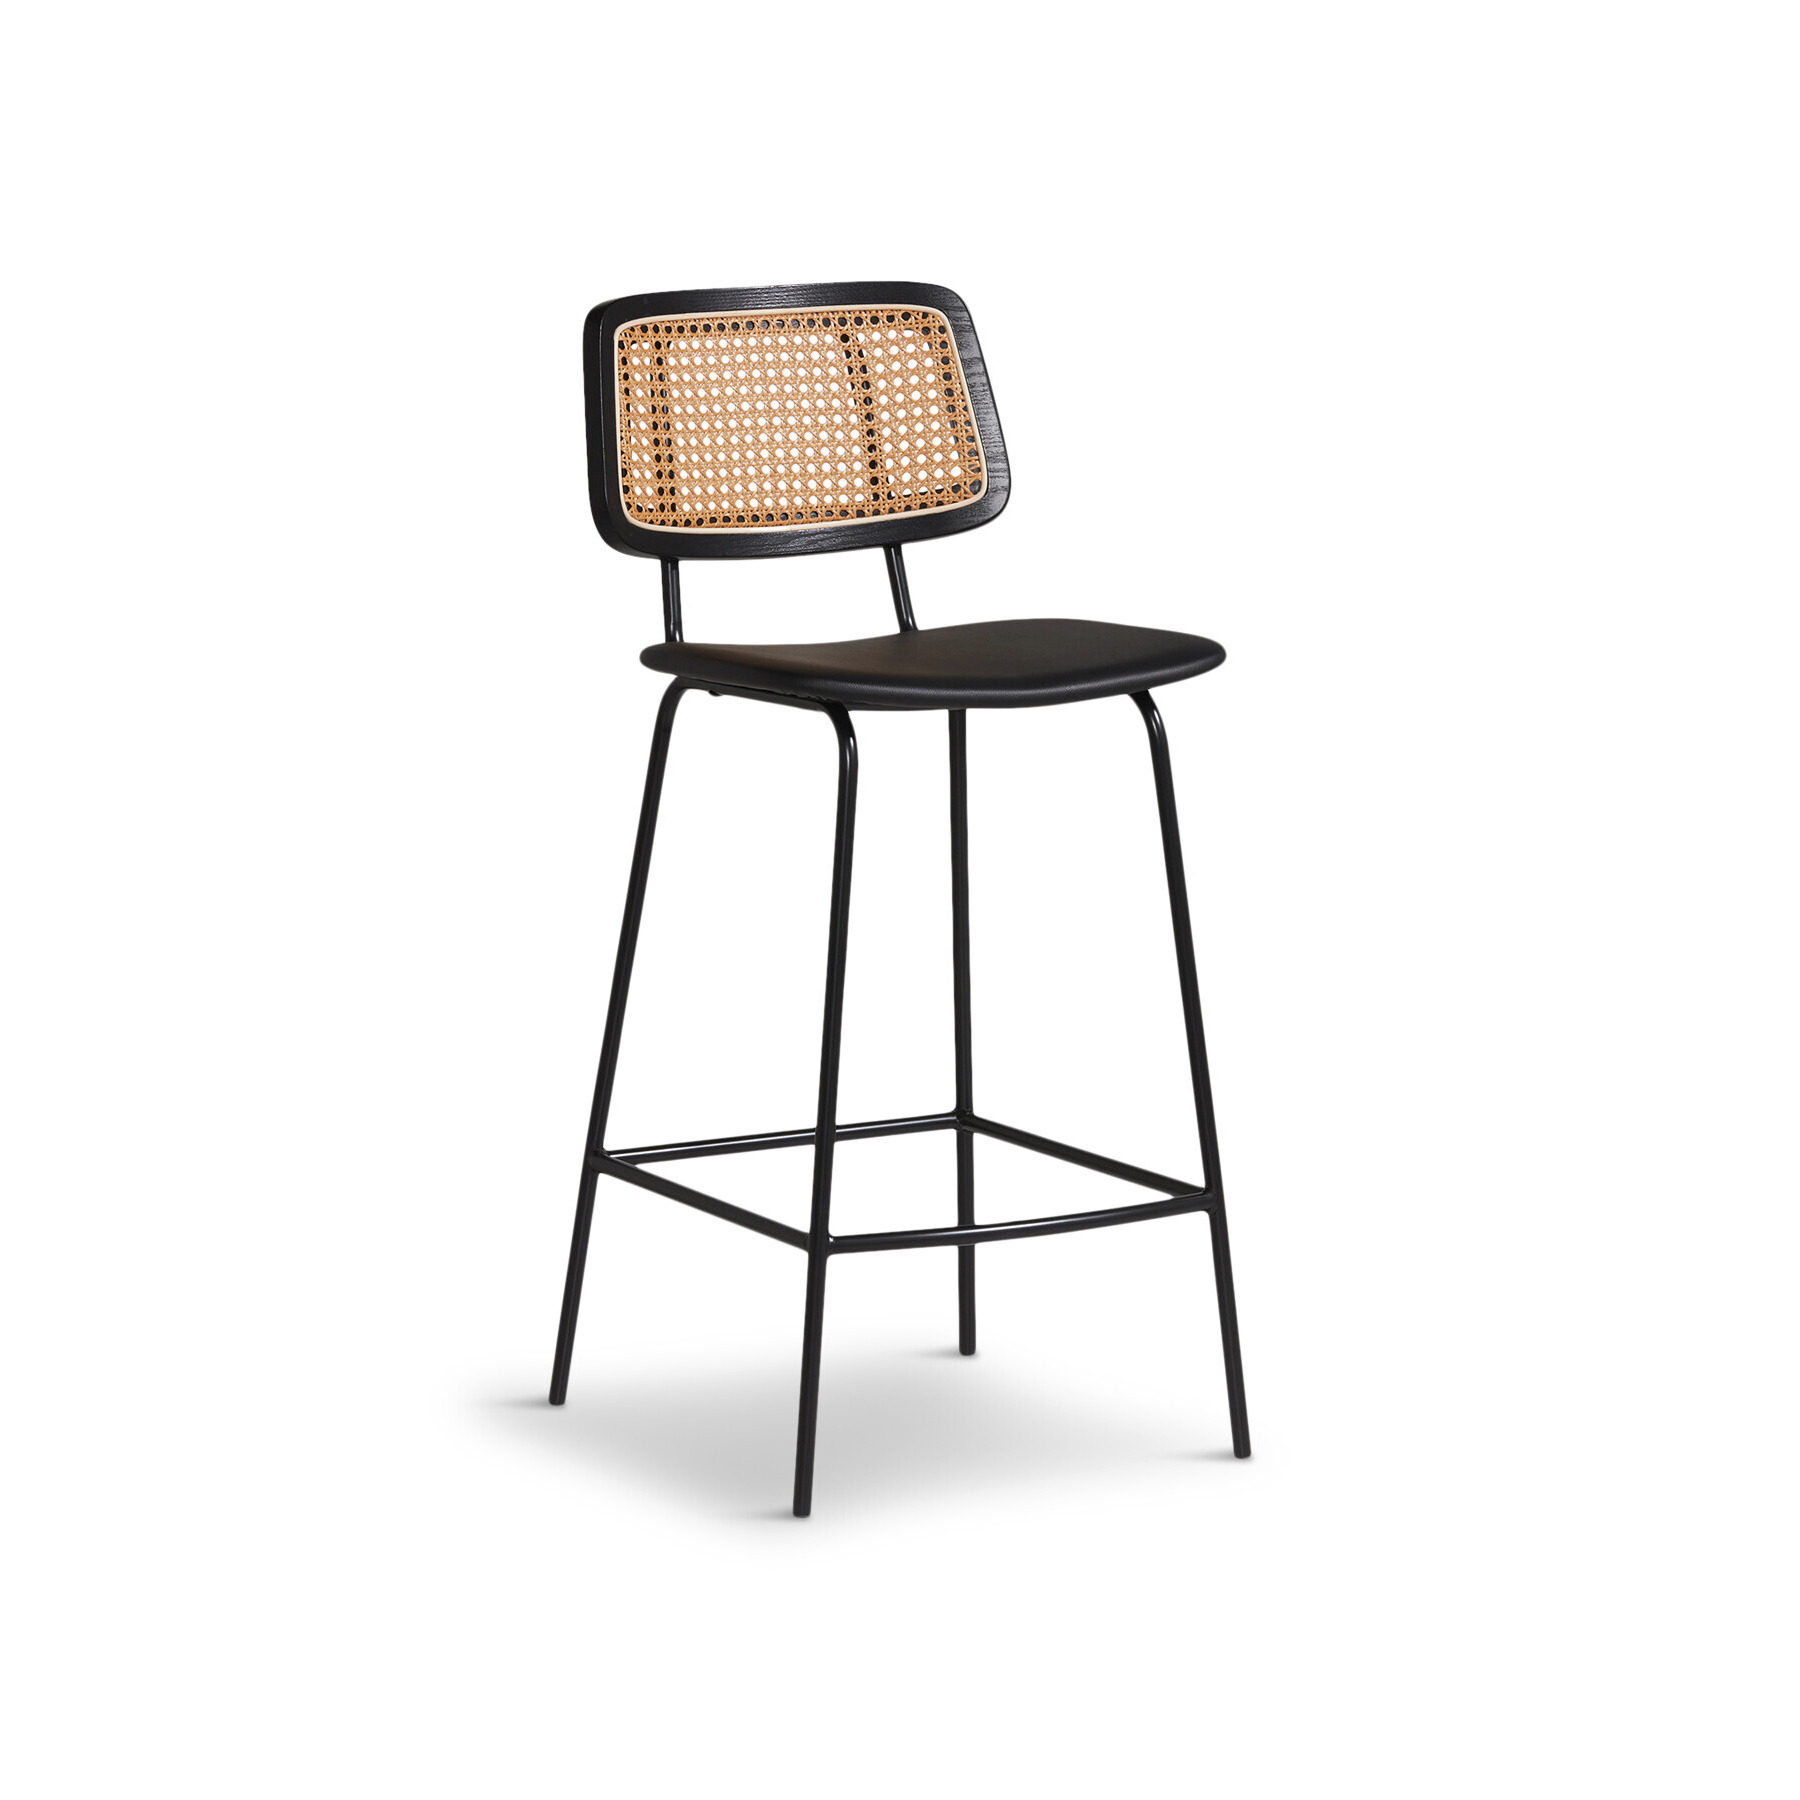 Barker and Stonehouse Paco Rattan Bar Stool Black - image 1